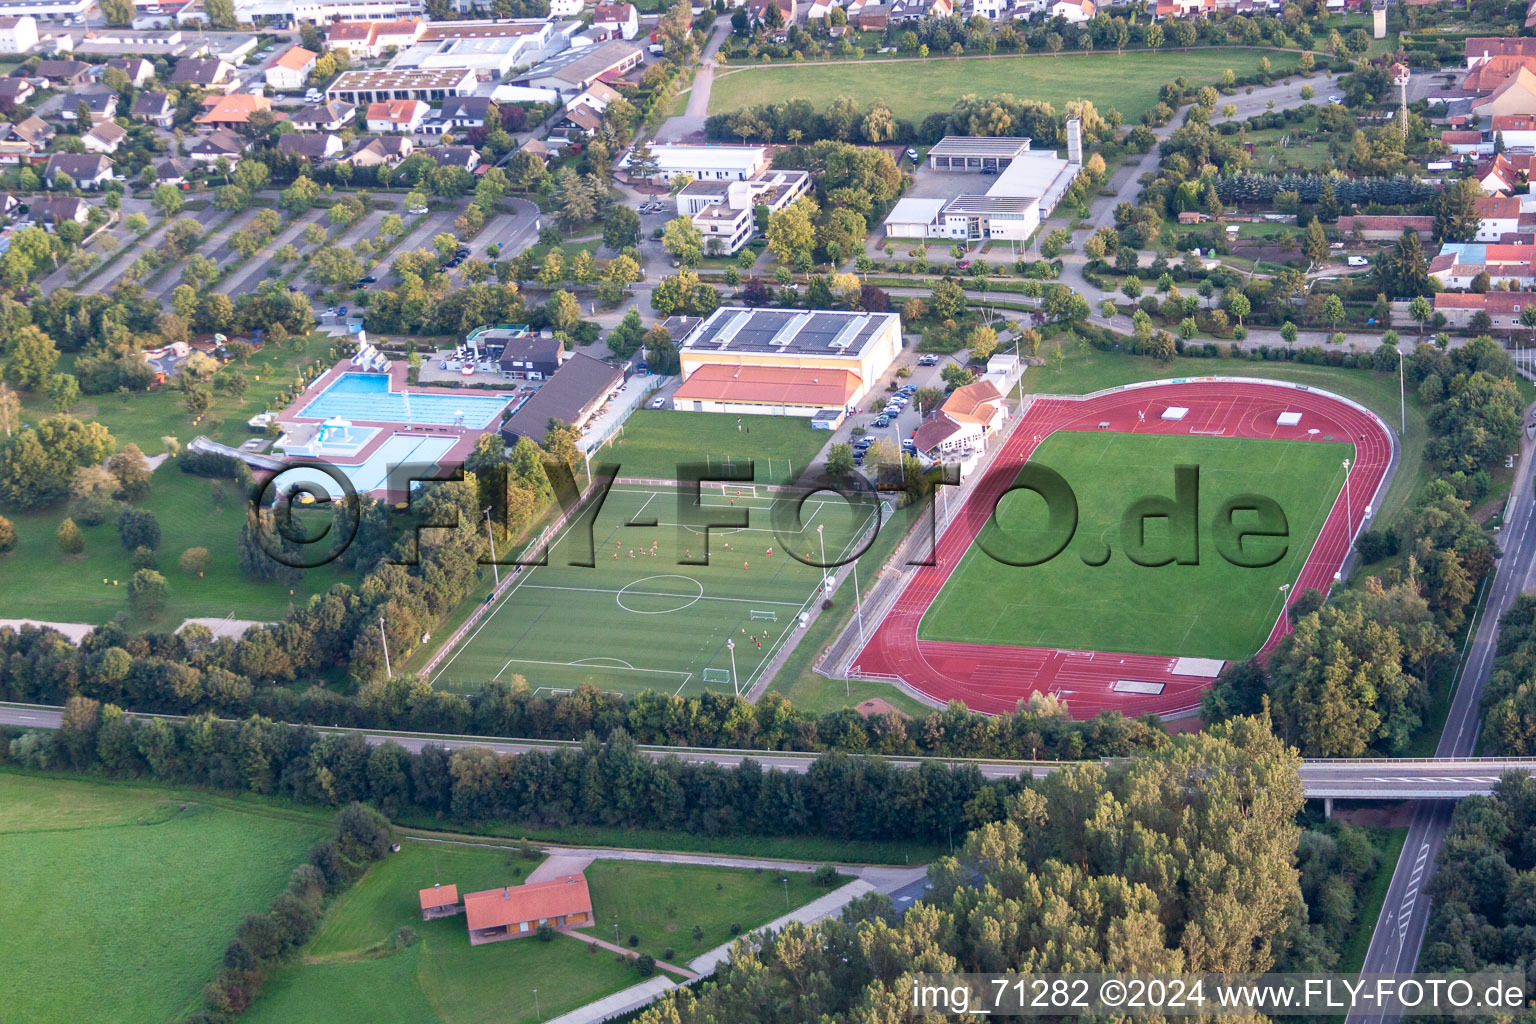 Queichtal Stadium in Offenbach an der Queich in the state Rhineland-Palatinate, Germany